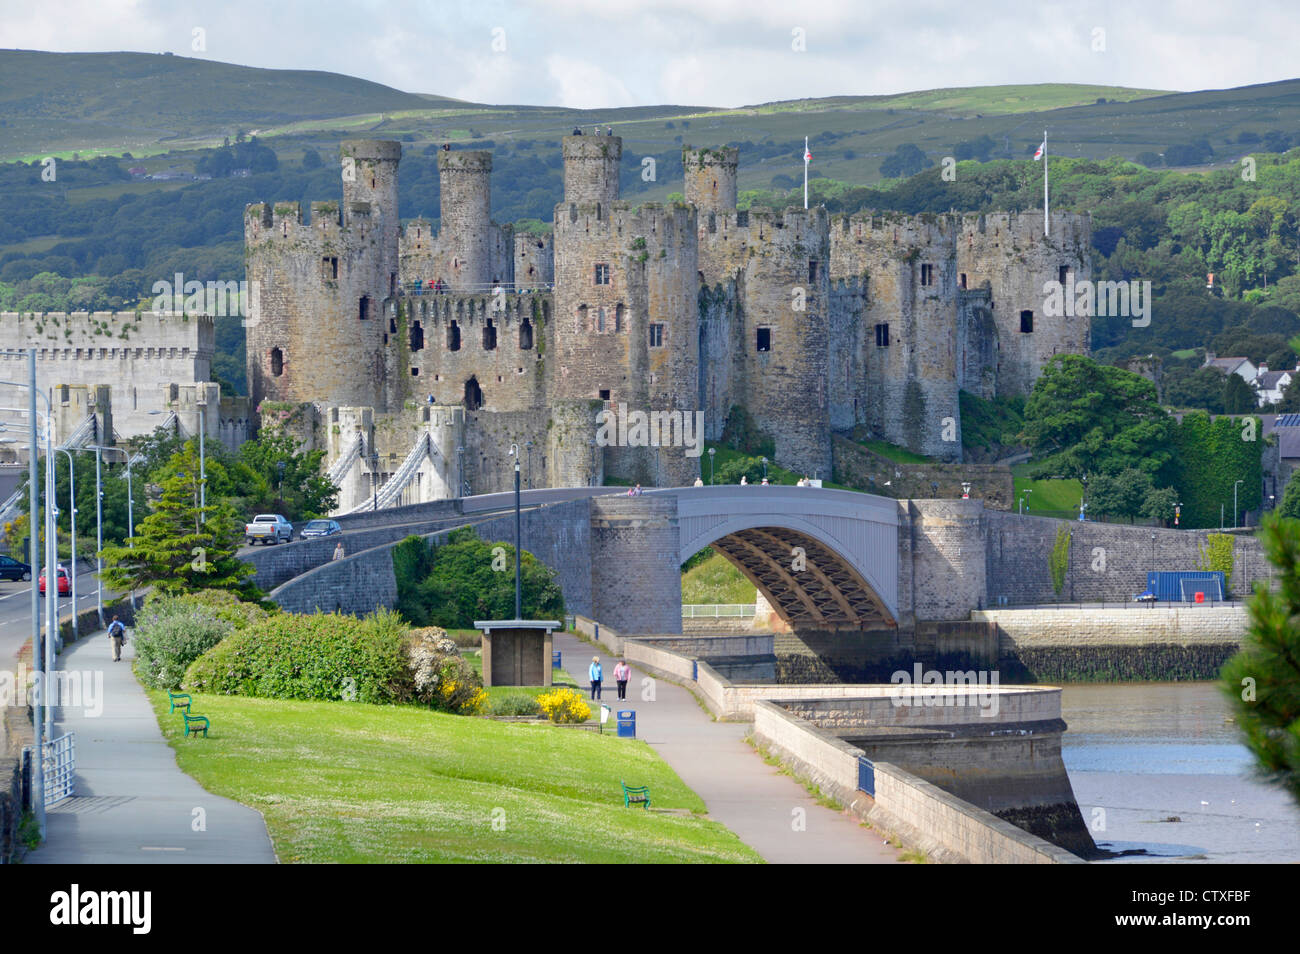 Medieval Conwy Castle a UNESCO World Heritage Site with modern road bridge crossing the River Conwy Welsh hilly countryside beyond in North Wales UK Stock Photo